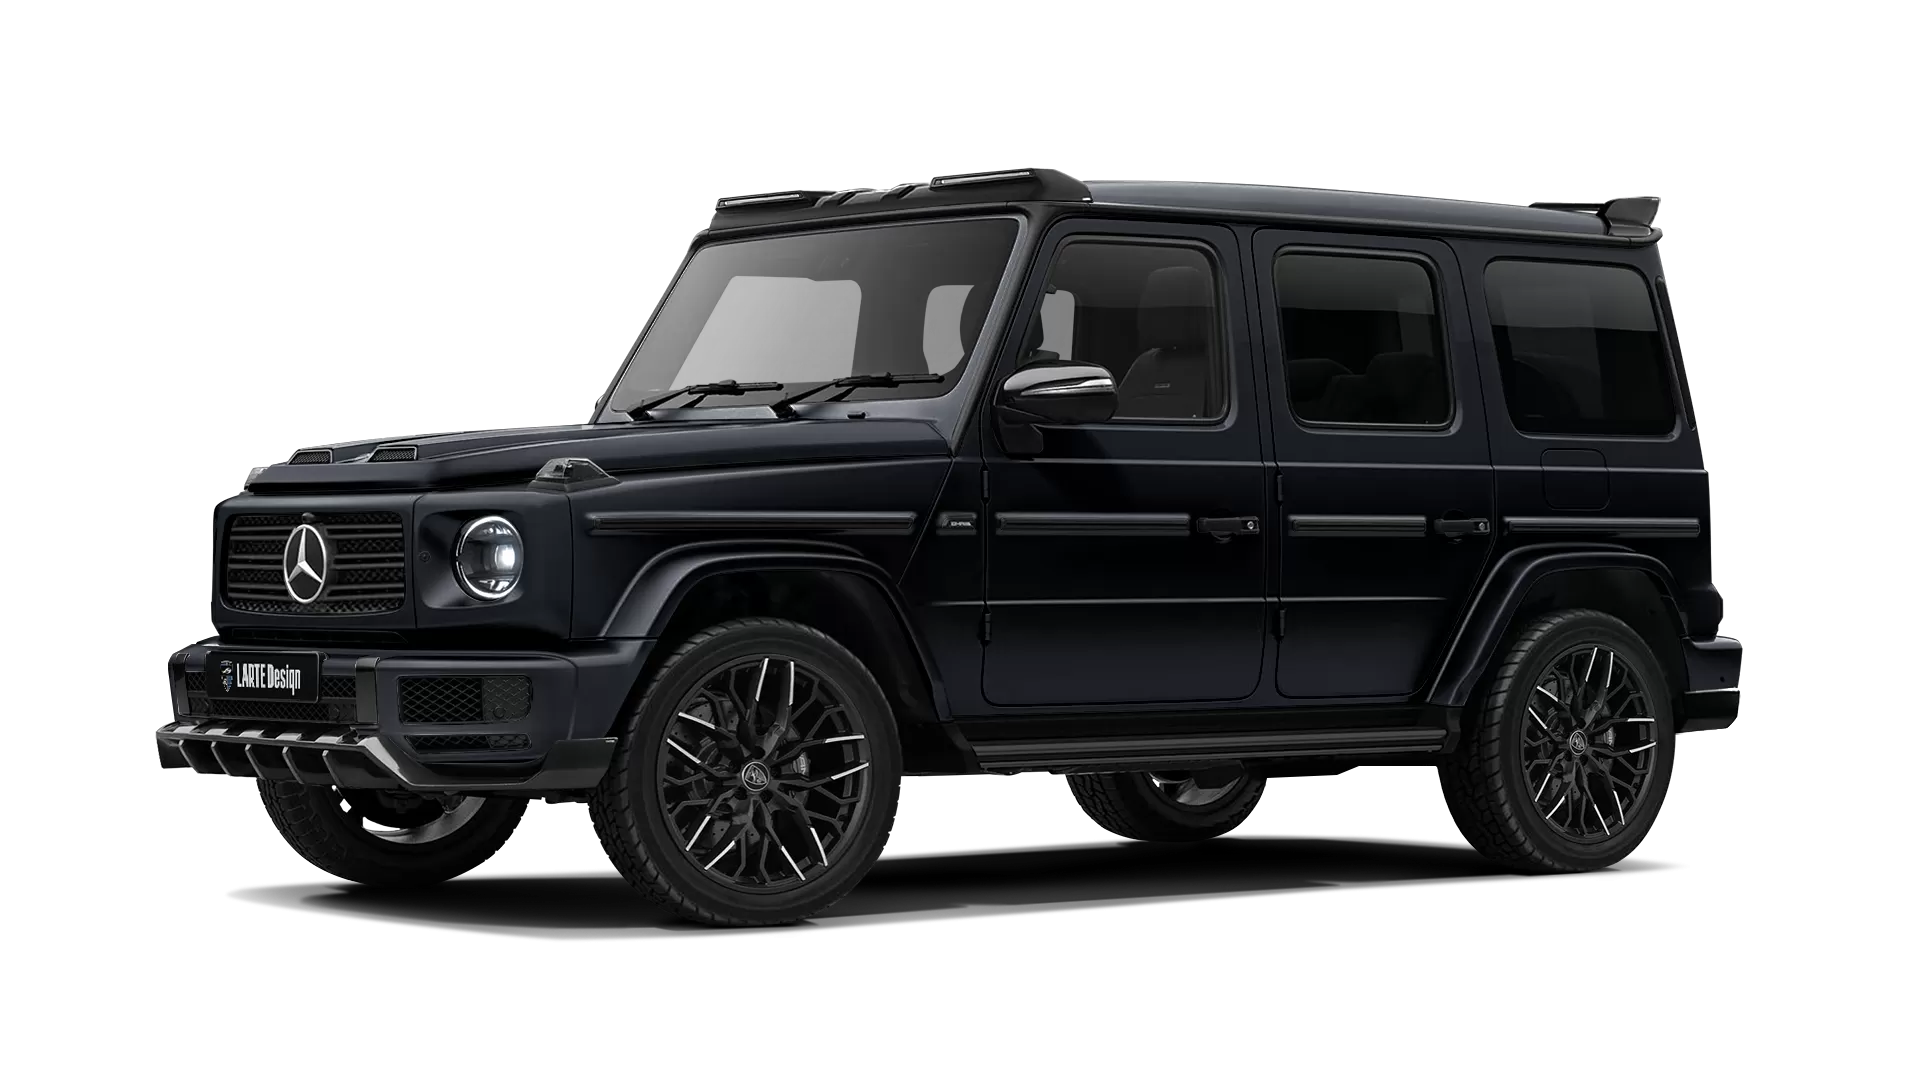 Mercedes G class W463 with painted body kit: front view shown in Night Black